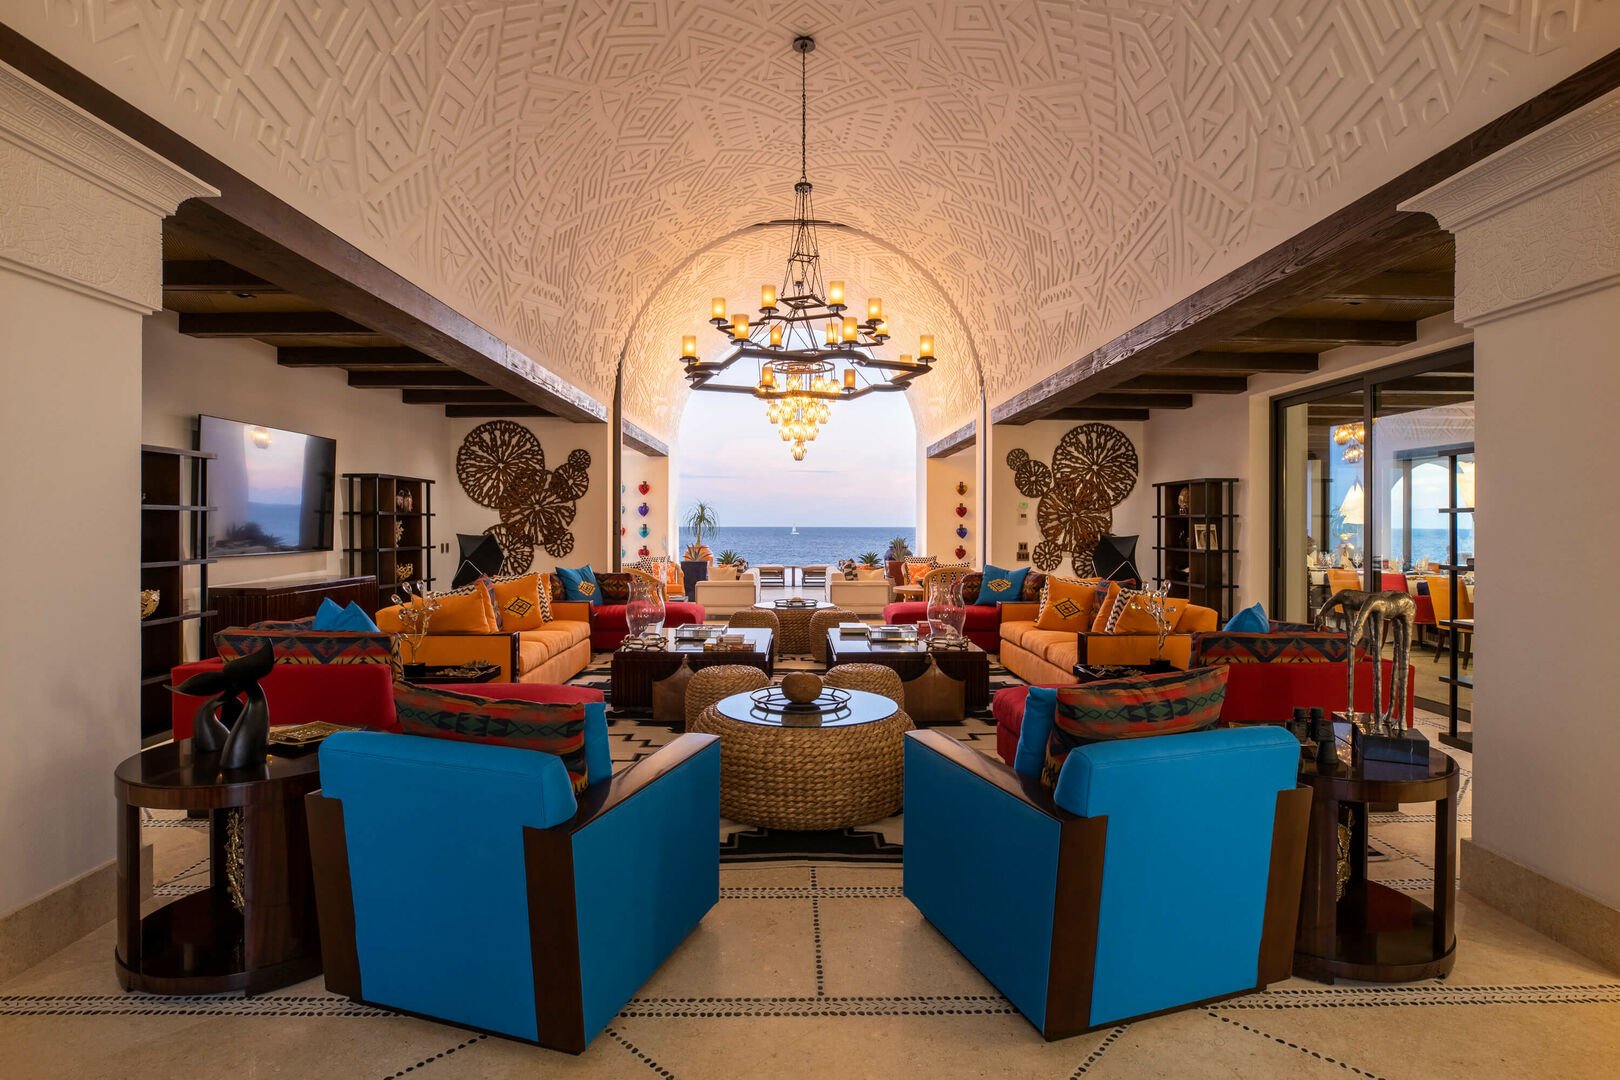 A large sitting area in this Los Cabos beachfront villa, filled with blue, orange, and red chairs and couches, with beach views.